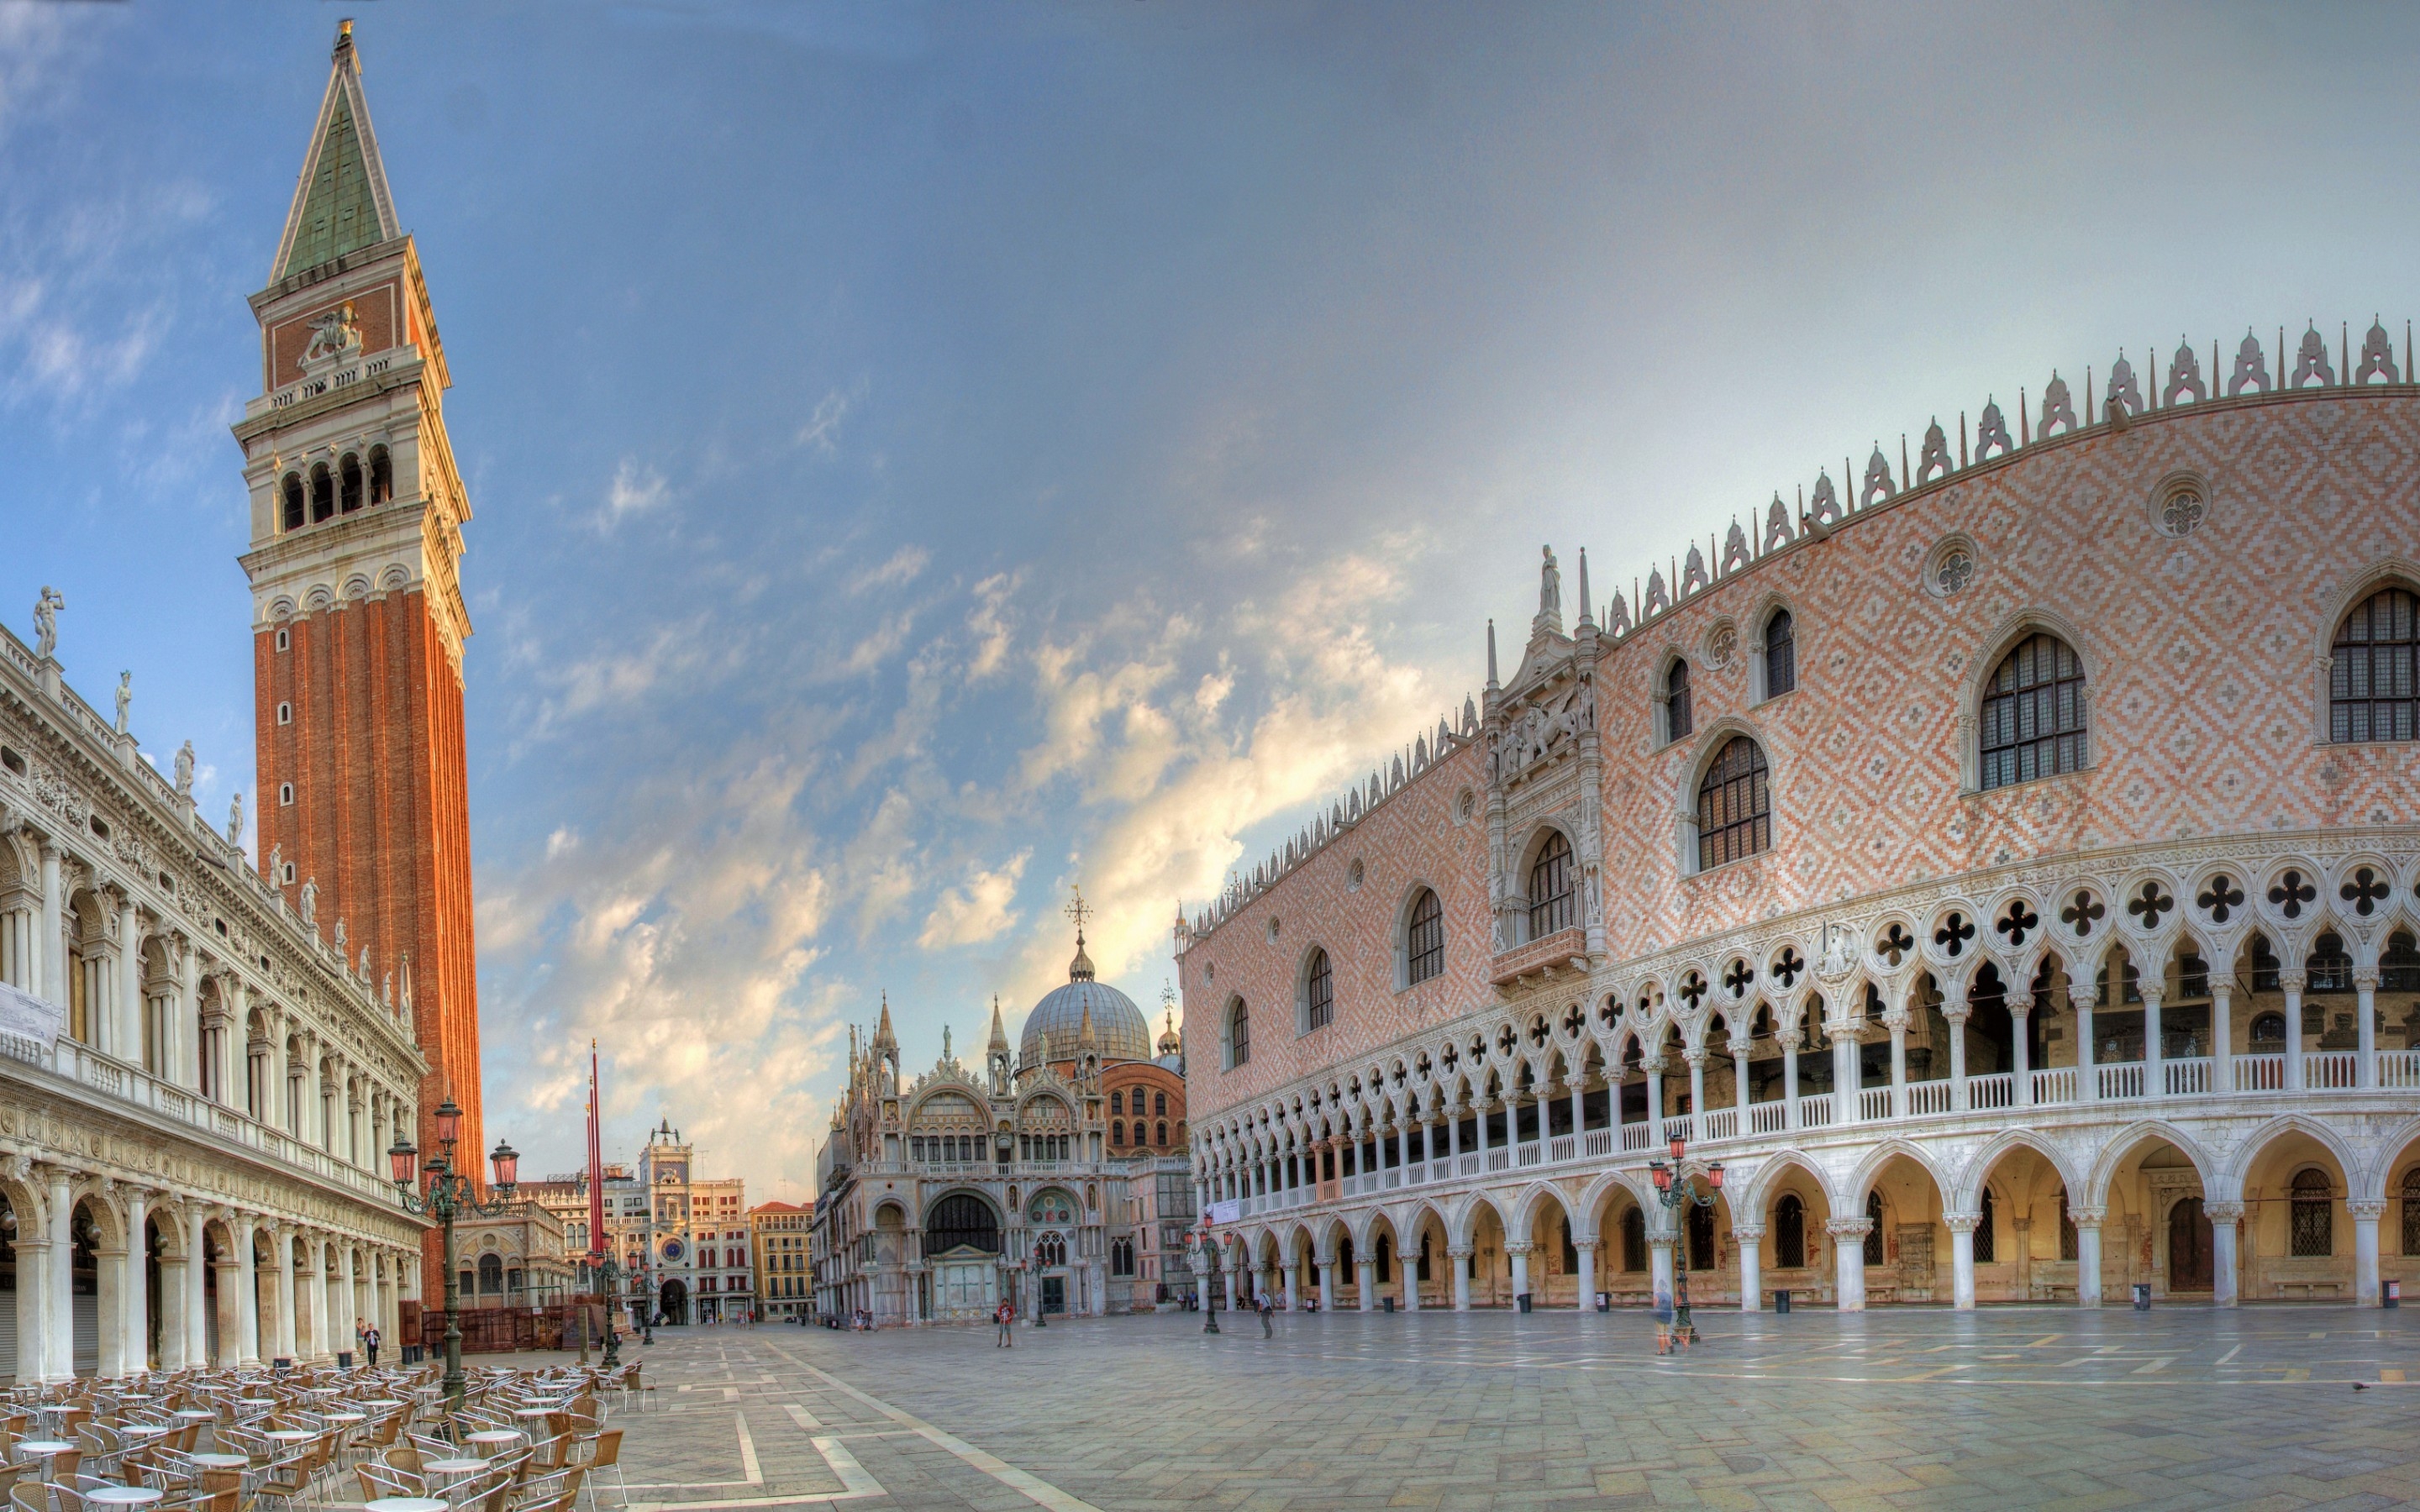 Piazza San Marco in Venice for 2880 x 1800 Retina Display resolution